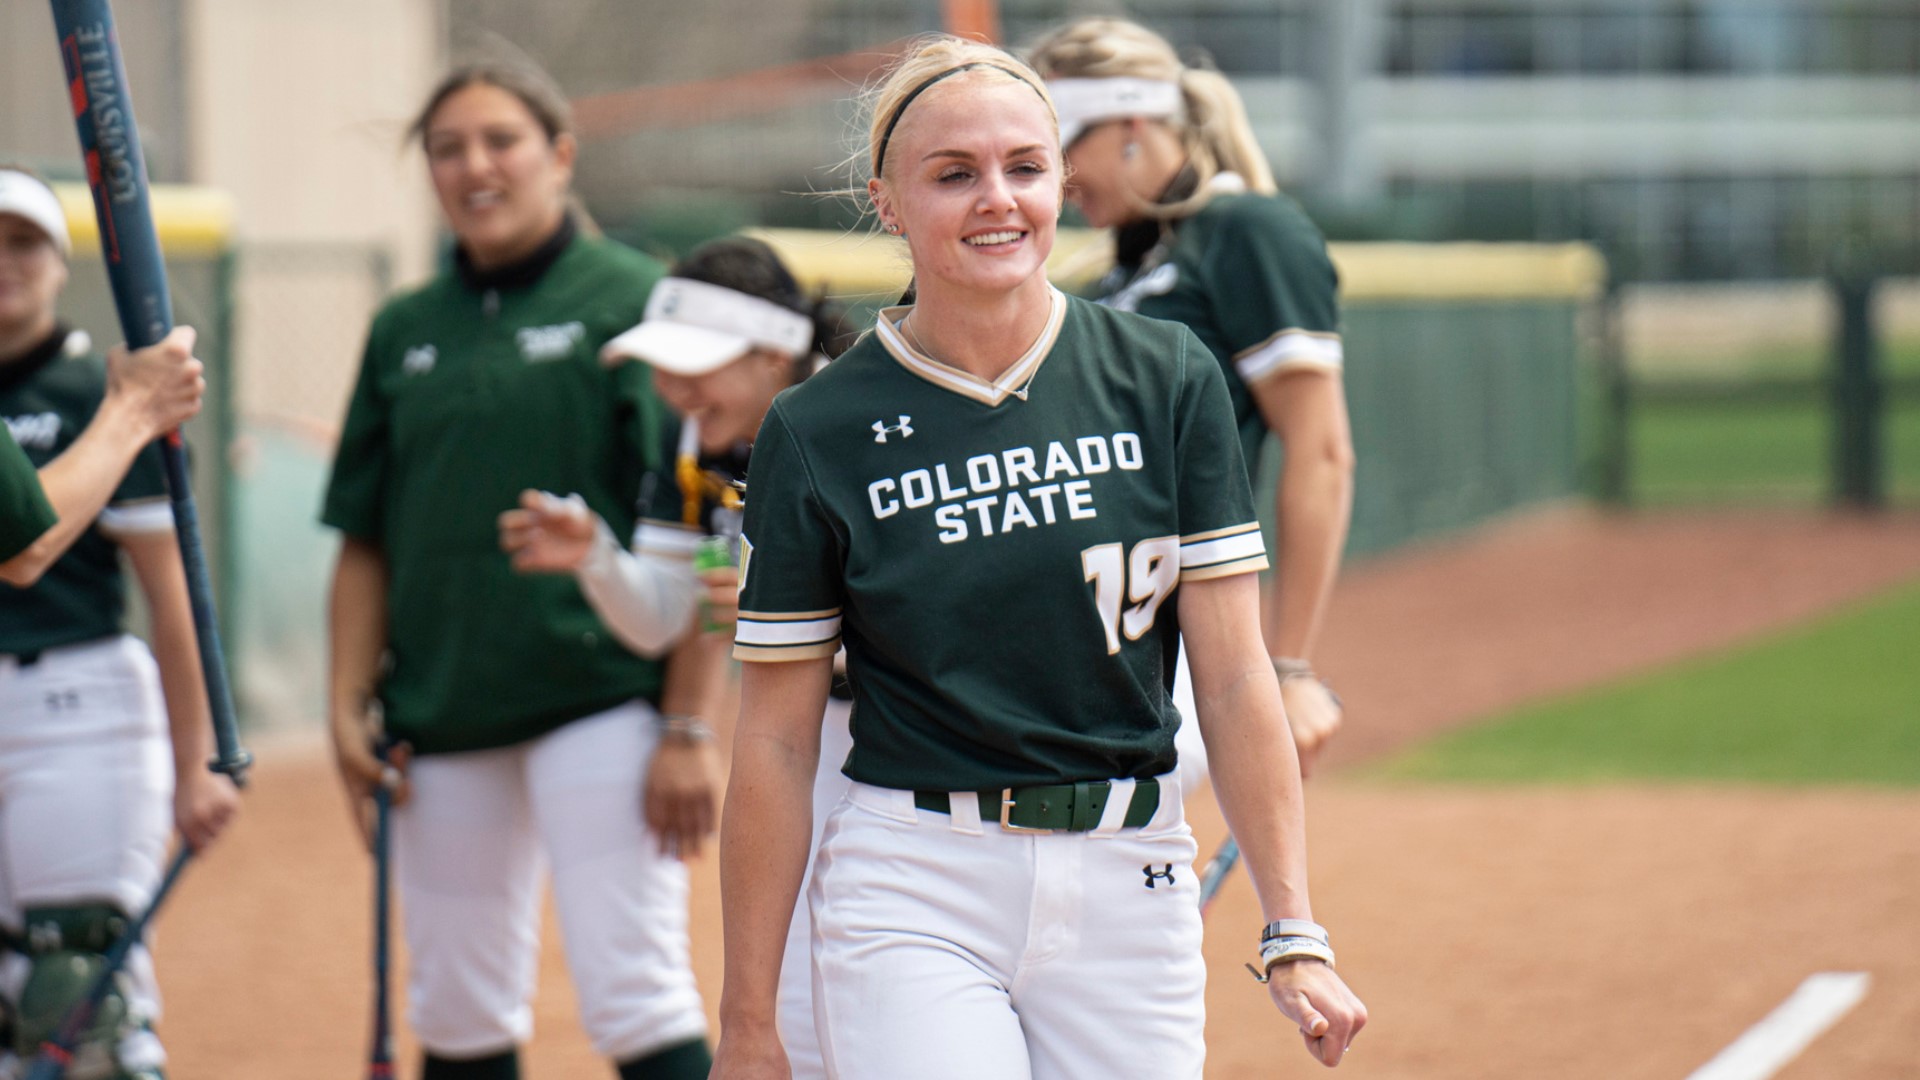 Jarecki, a graduate of Chatfield High School, started her collegiate career at Chadron State College before starting at Colorado State as a walk-on.